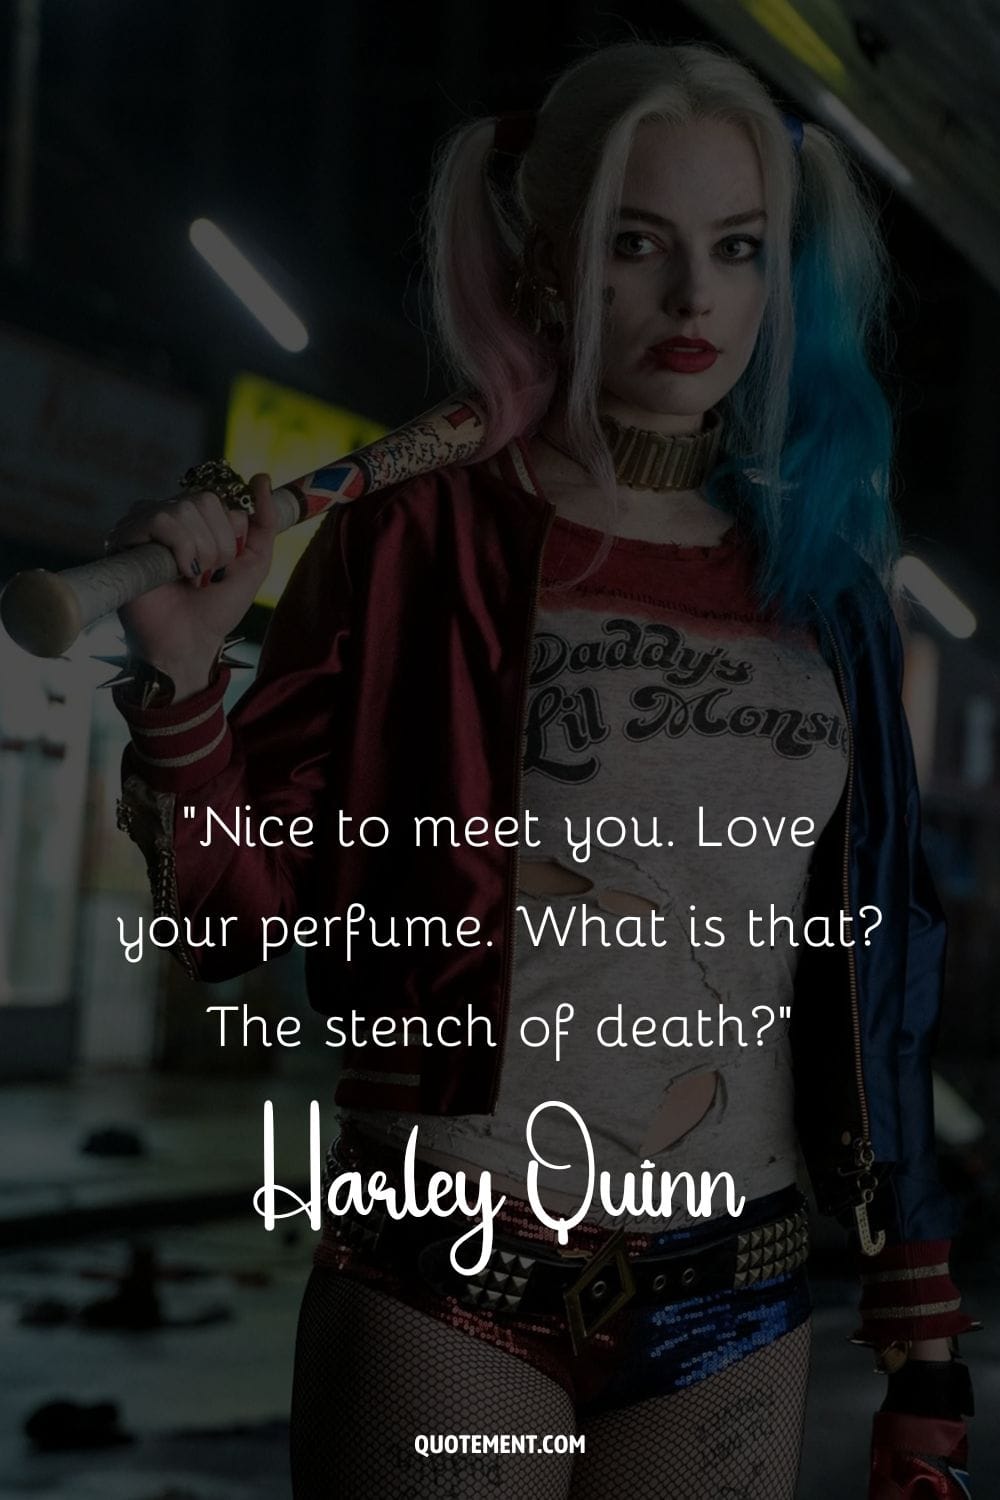 Gotham's craziest criminal, Harley Quinn, representing the best Harley Quinn quote.